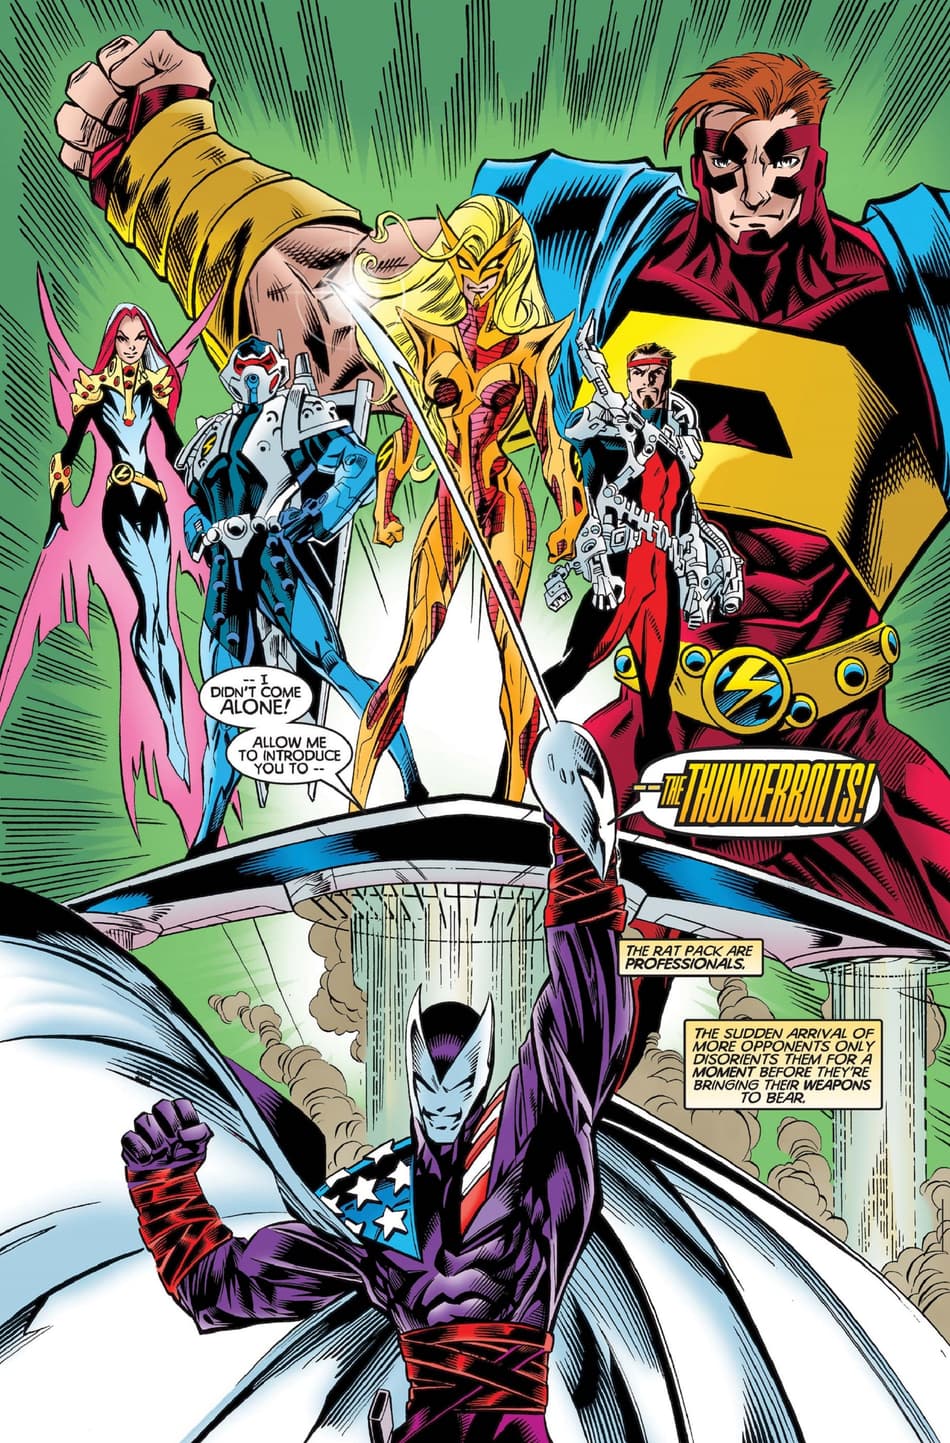 Citizen V introduces the team in THUNDERBOLTS (1997) #1.